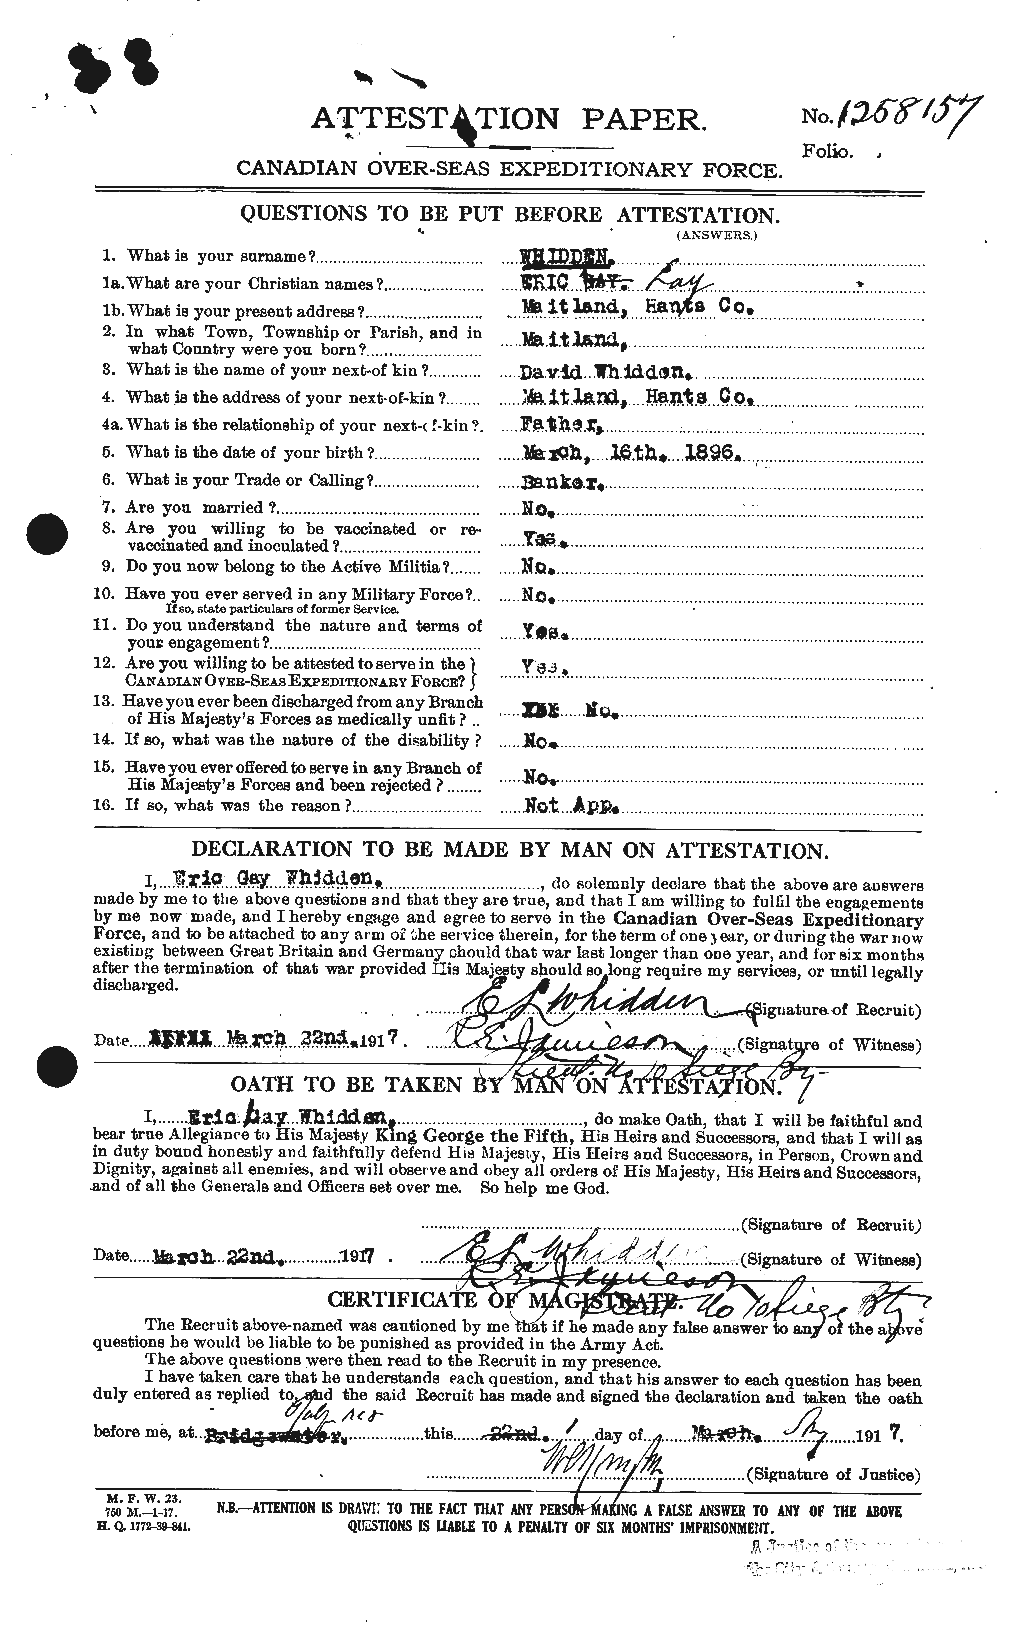 Personnel Records of the First World War - CEF 668660a